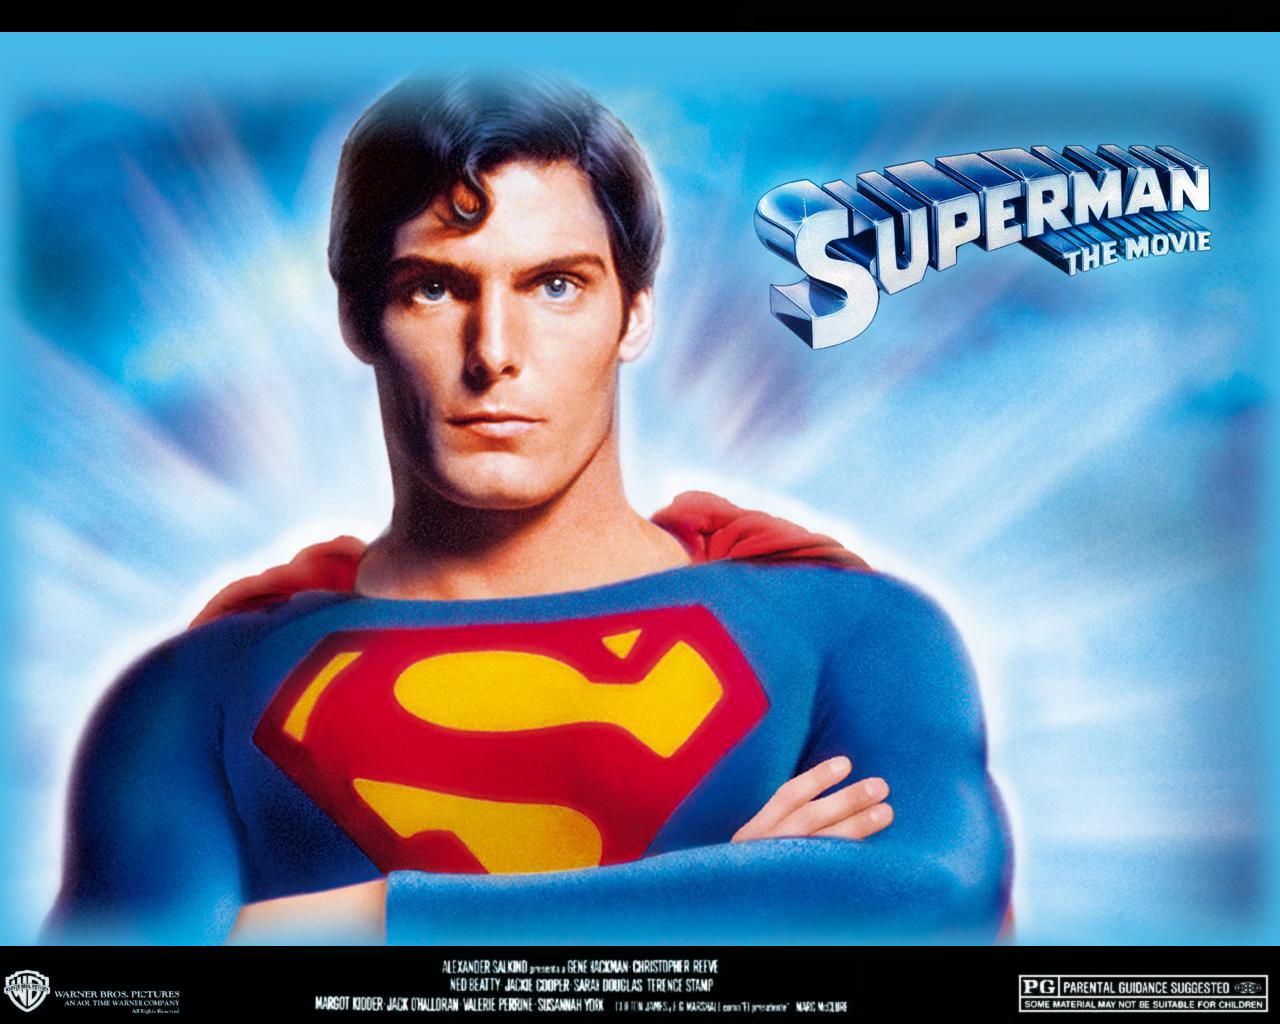 Superman Also Known As The Movie Is A Superhero Film